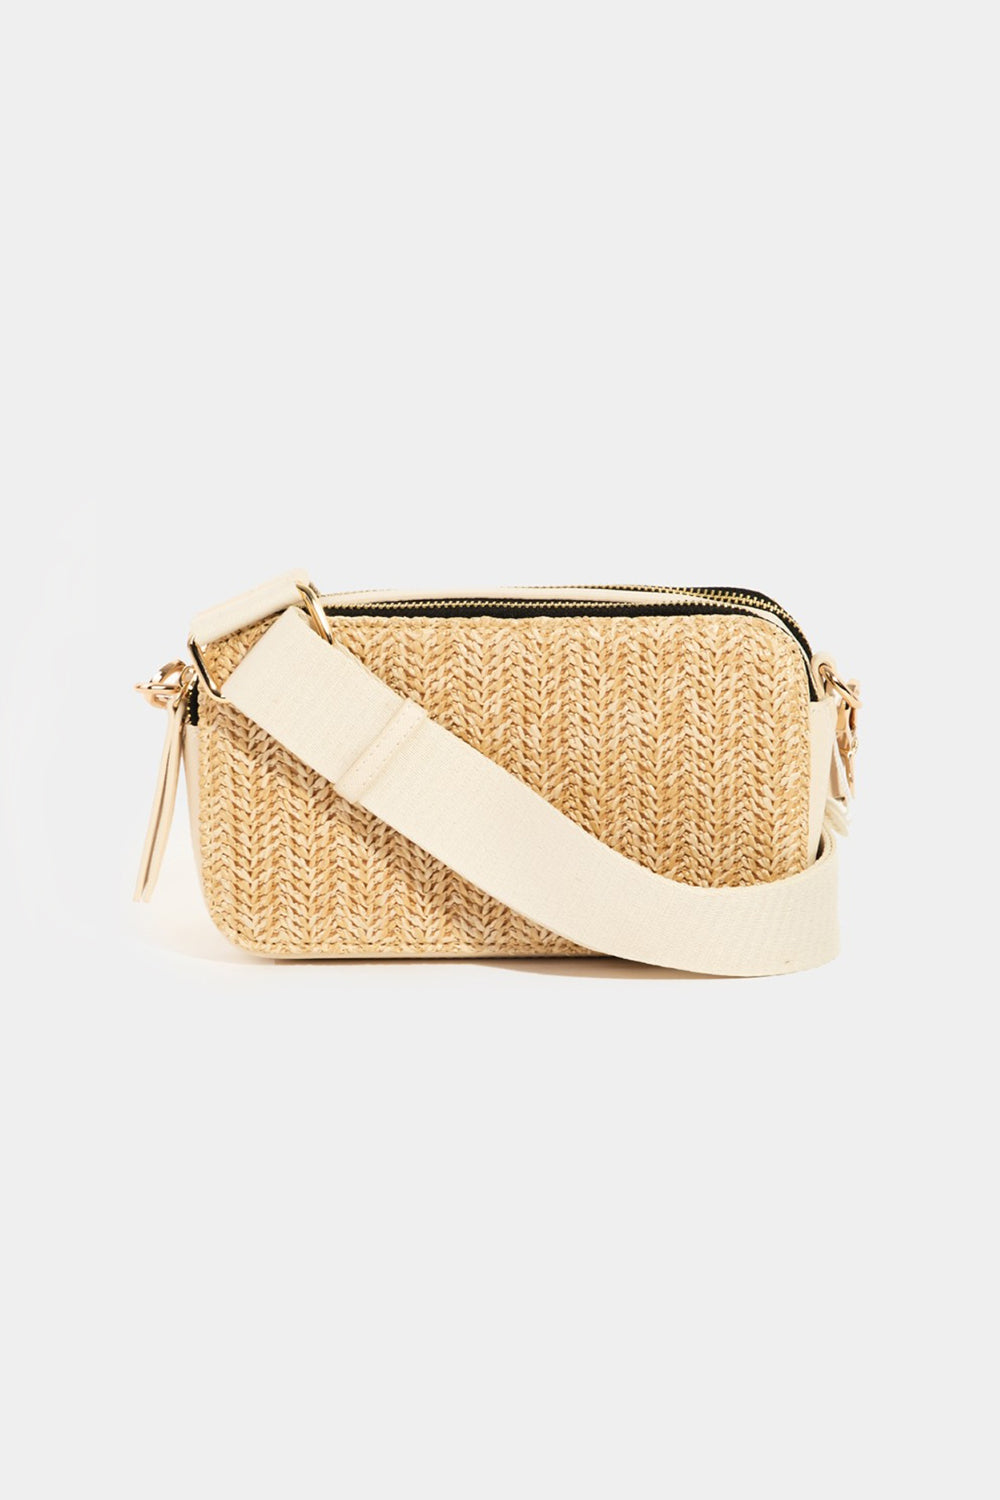 Fame Straw Contrast Crossbody Bag White One Size